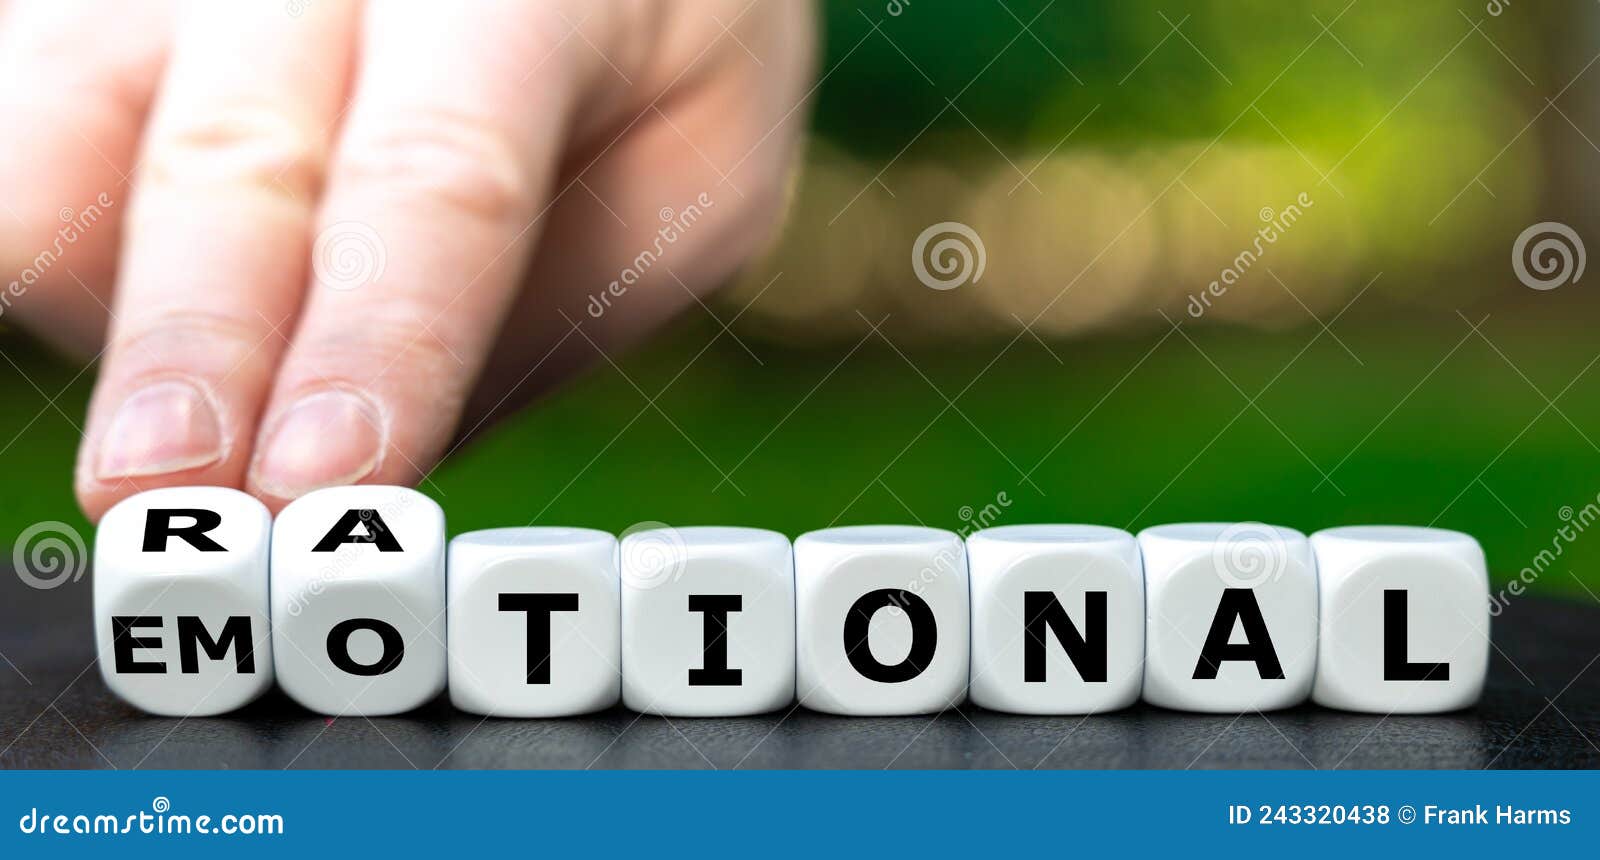 hand turns dice and changes the word emotional to rational